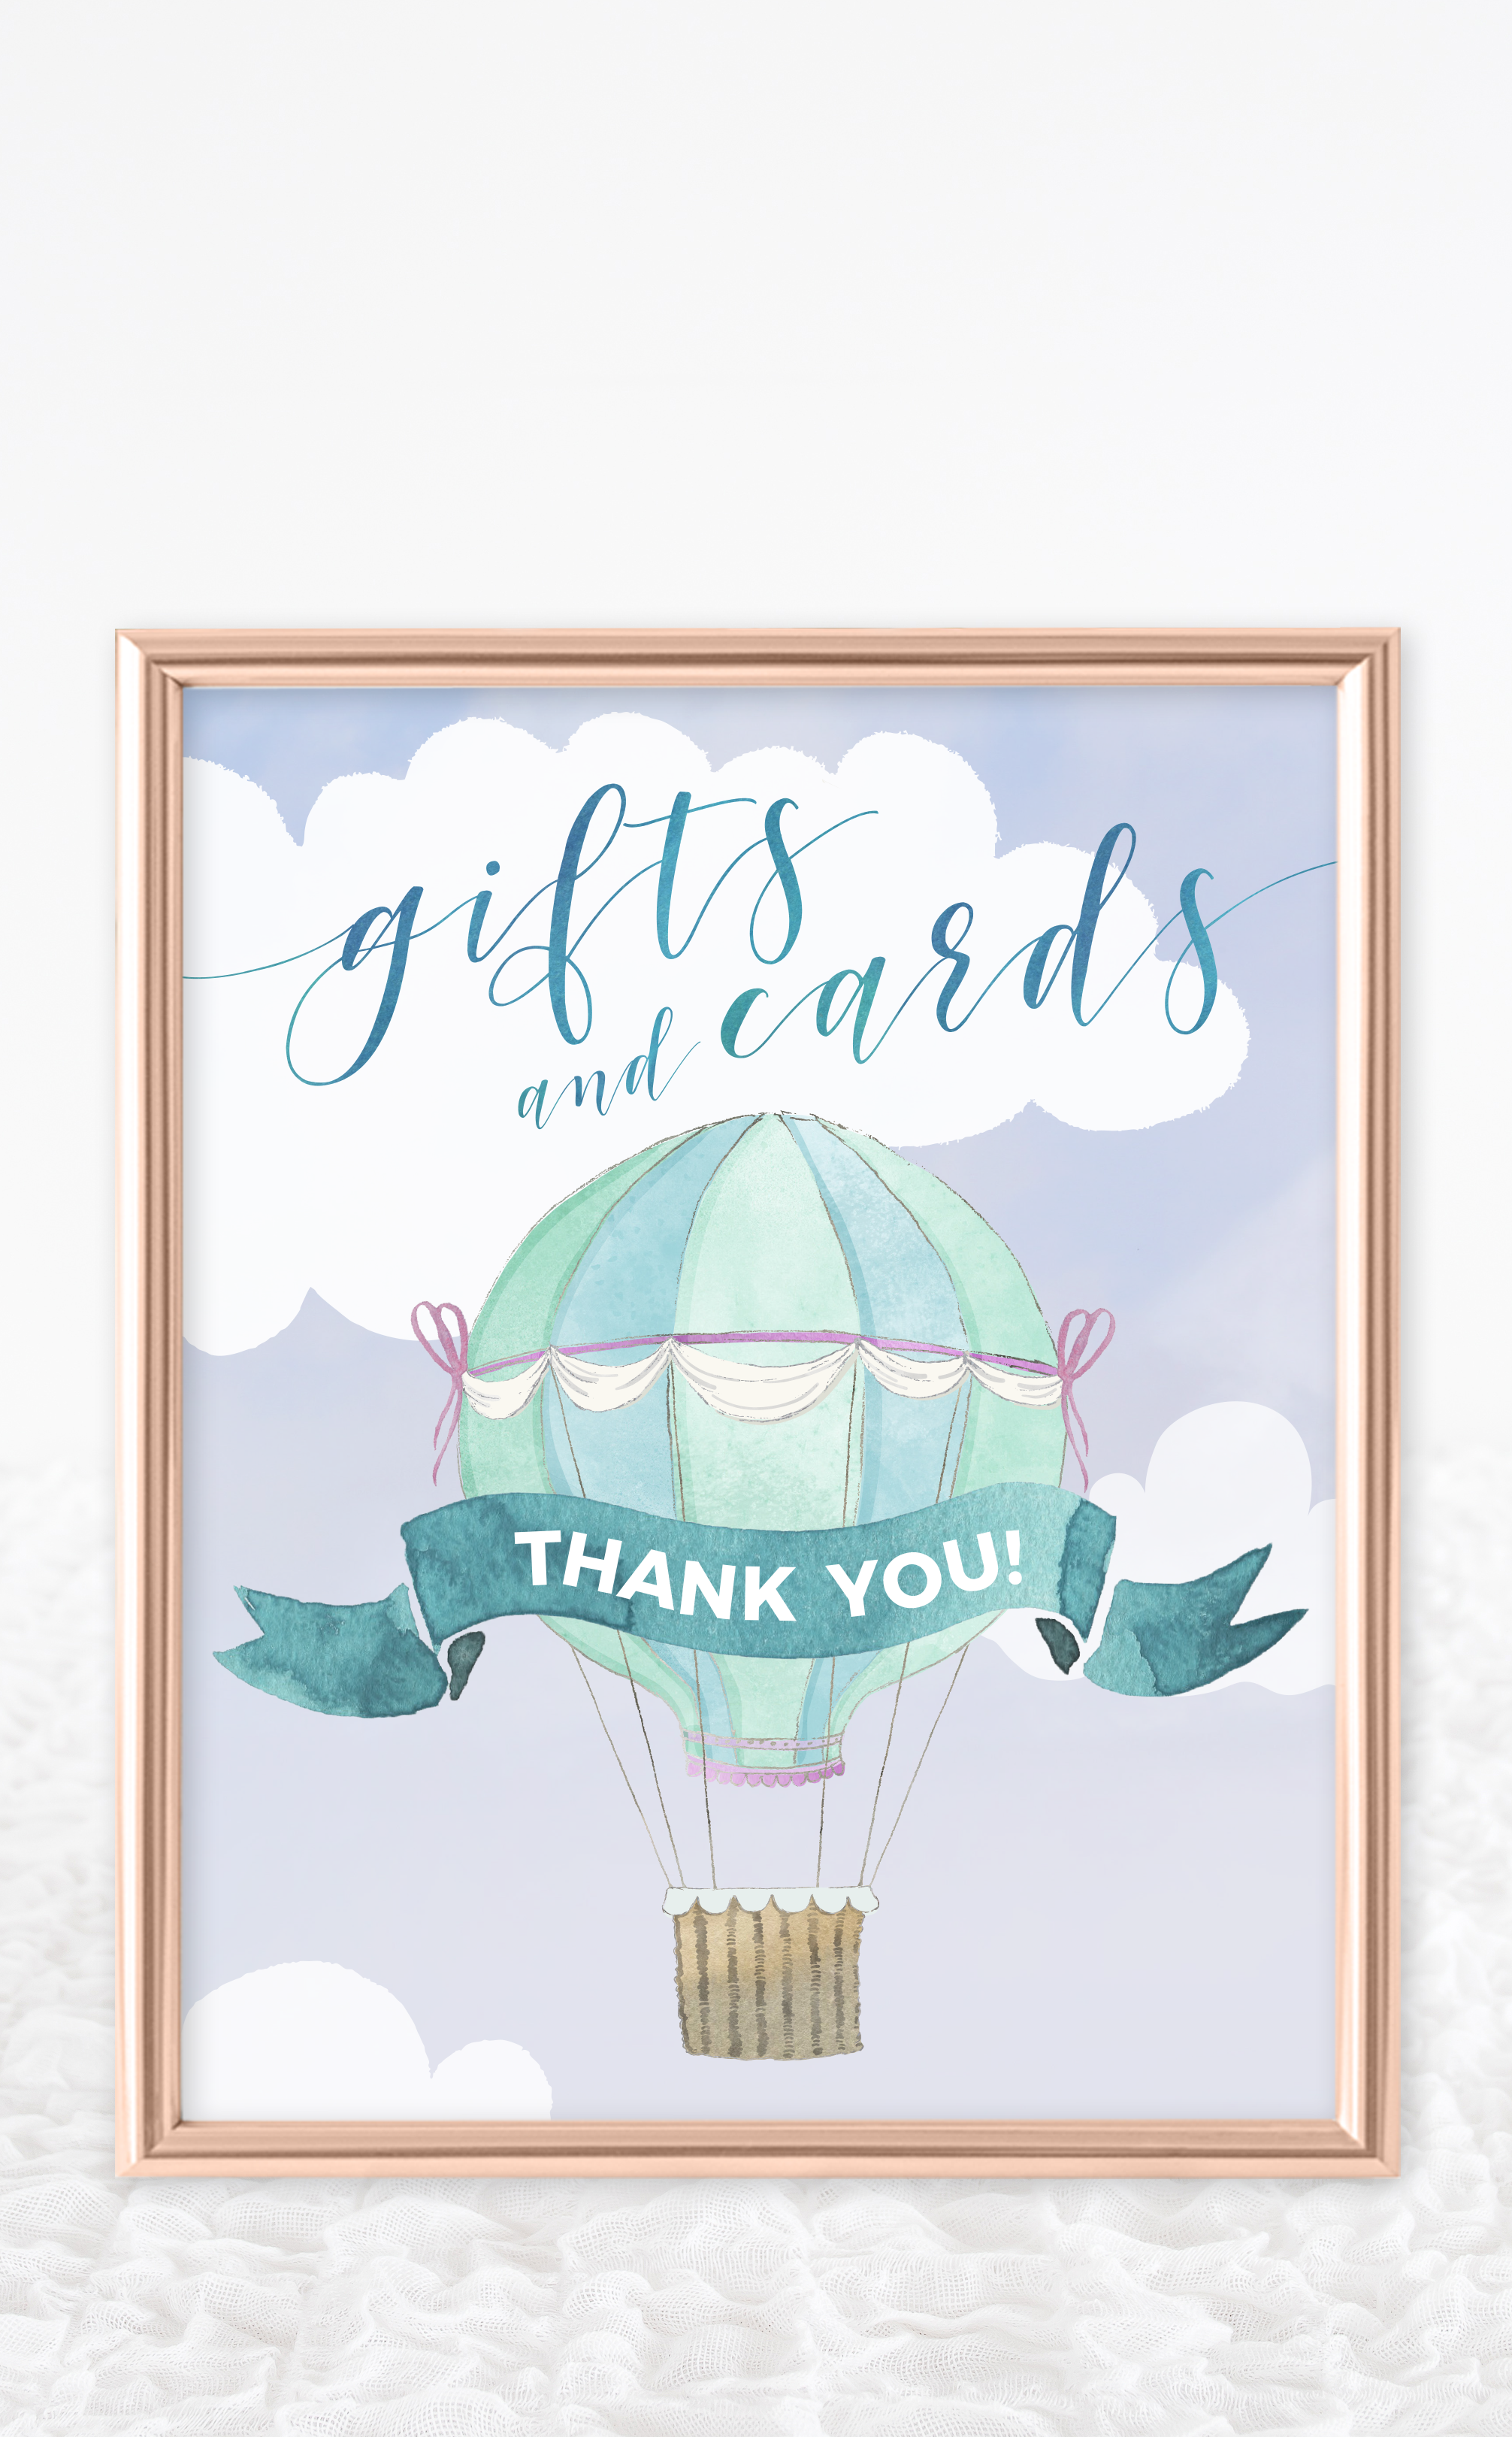 Christmas Hot Air Ballooning Gift Voucher Template | Printable Gift  Certificate